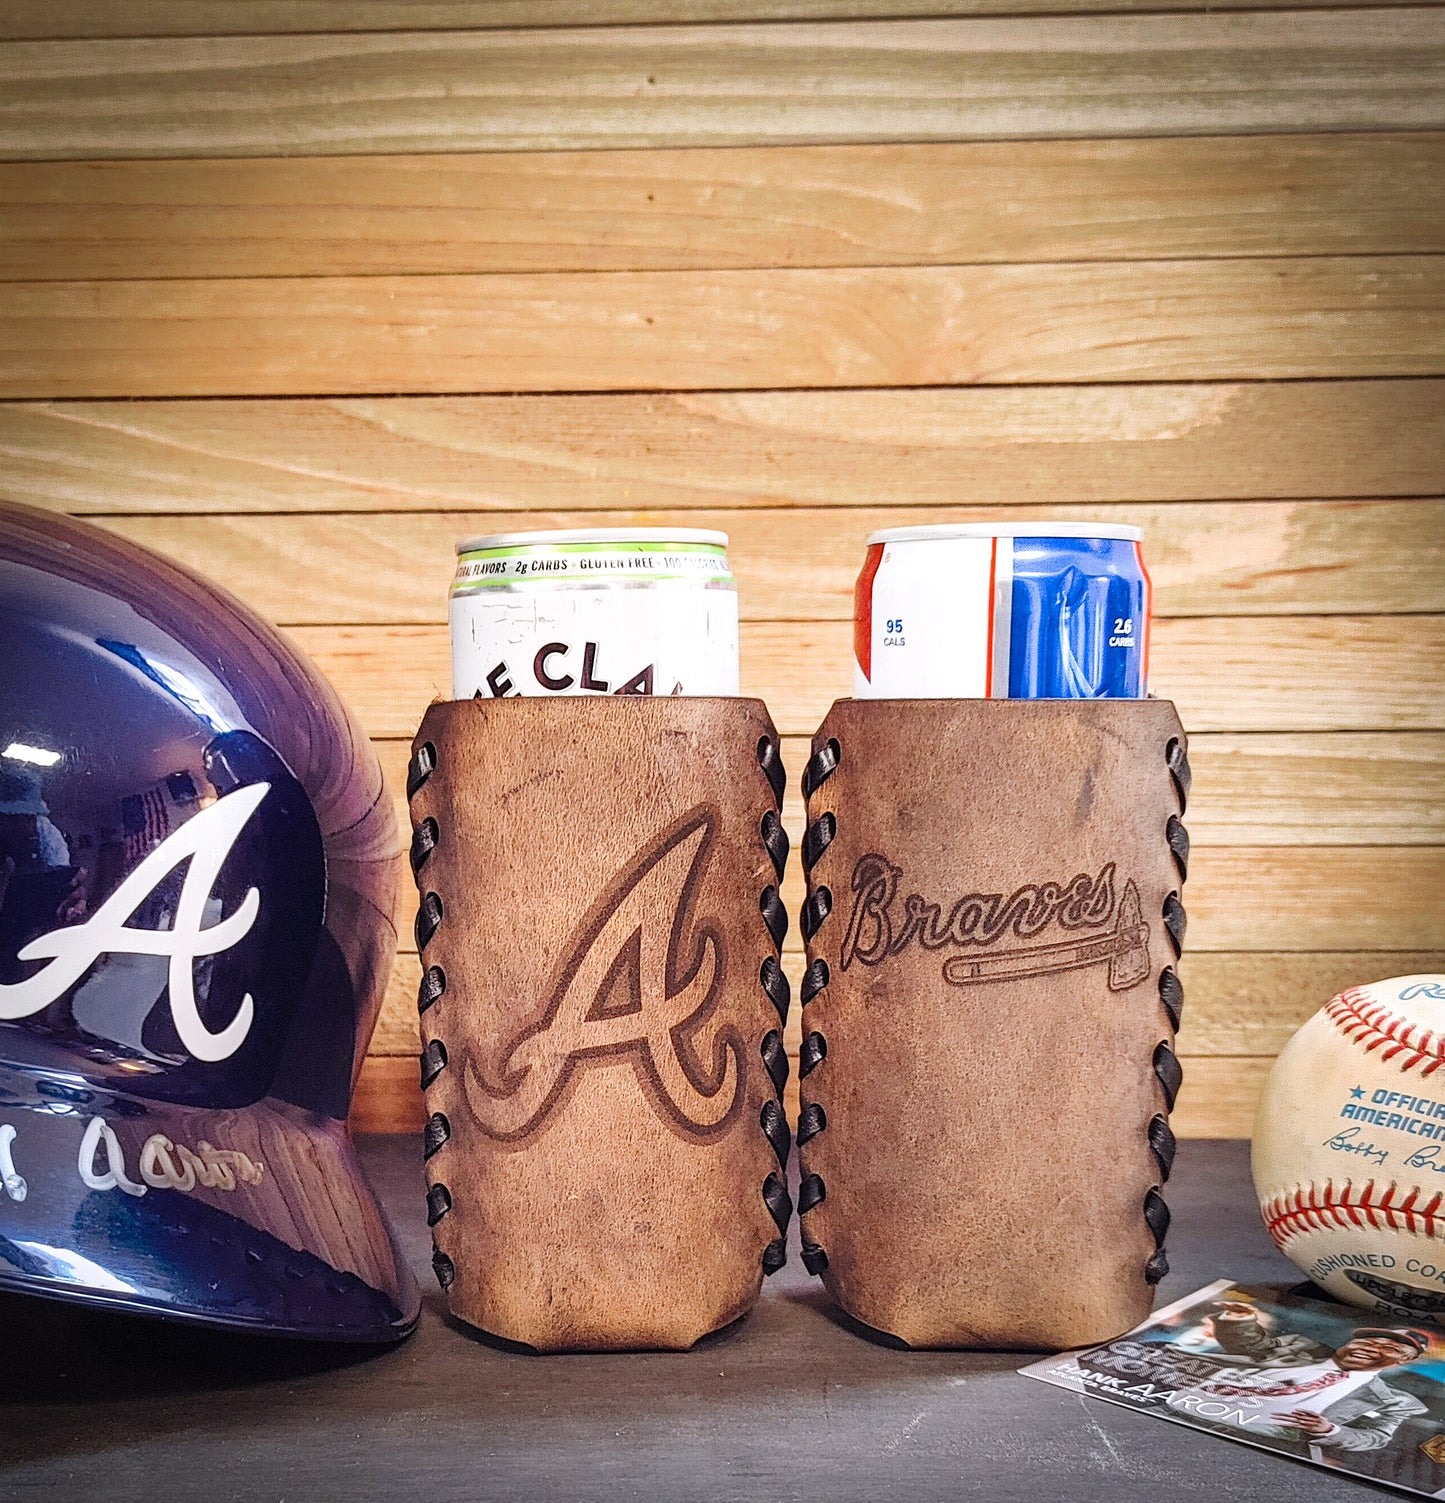 Atlanta braves leather koozie in brown color perfect Father's Day gift ideas